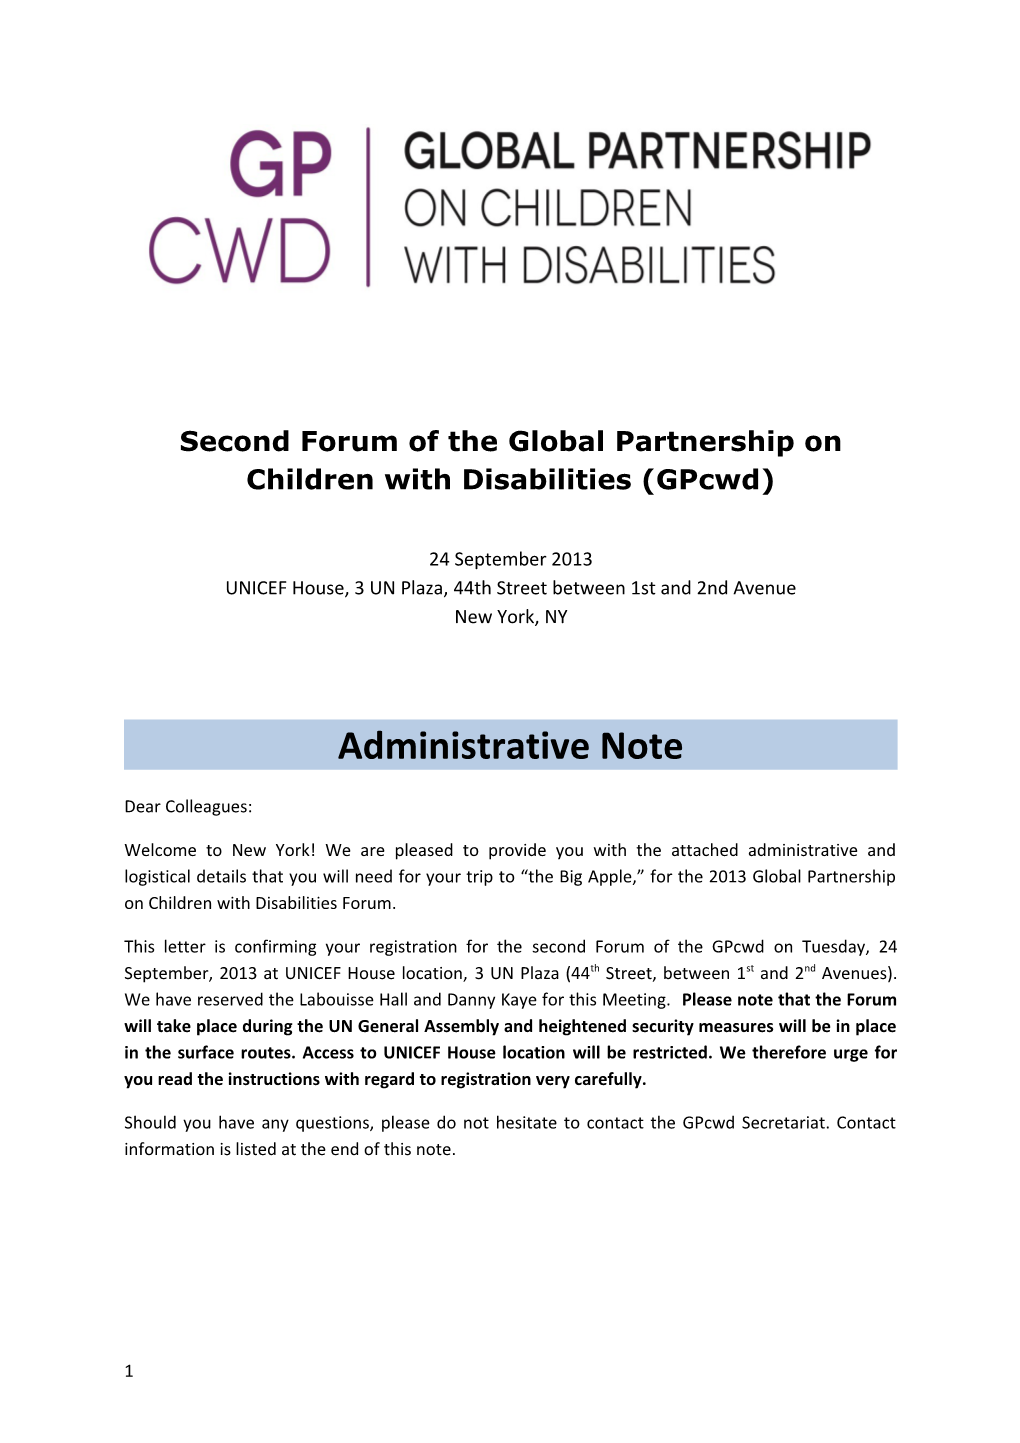 Second Forum of Theglobal Partnership on Children with Disabilities (Gpcwd)